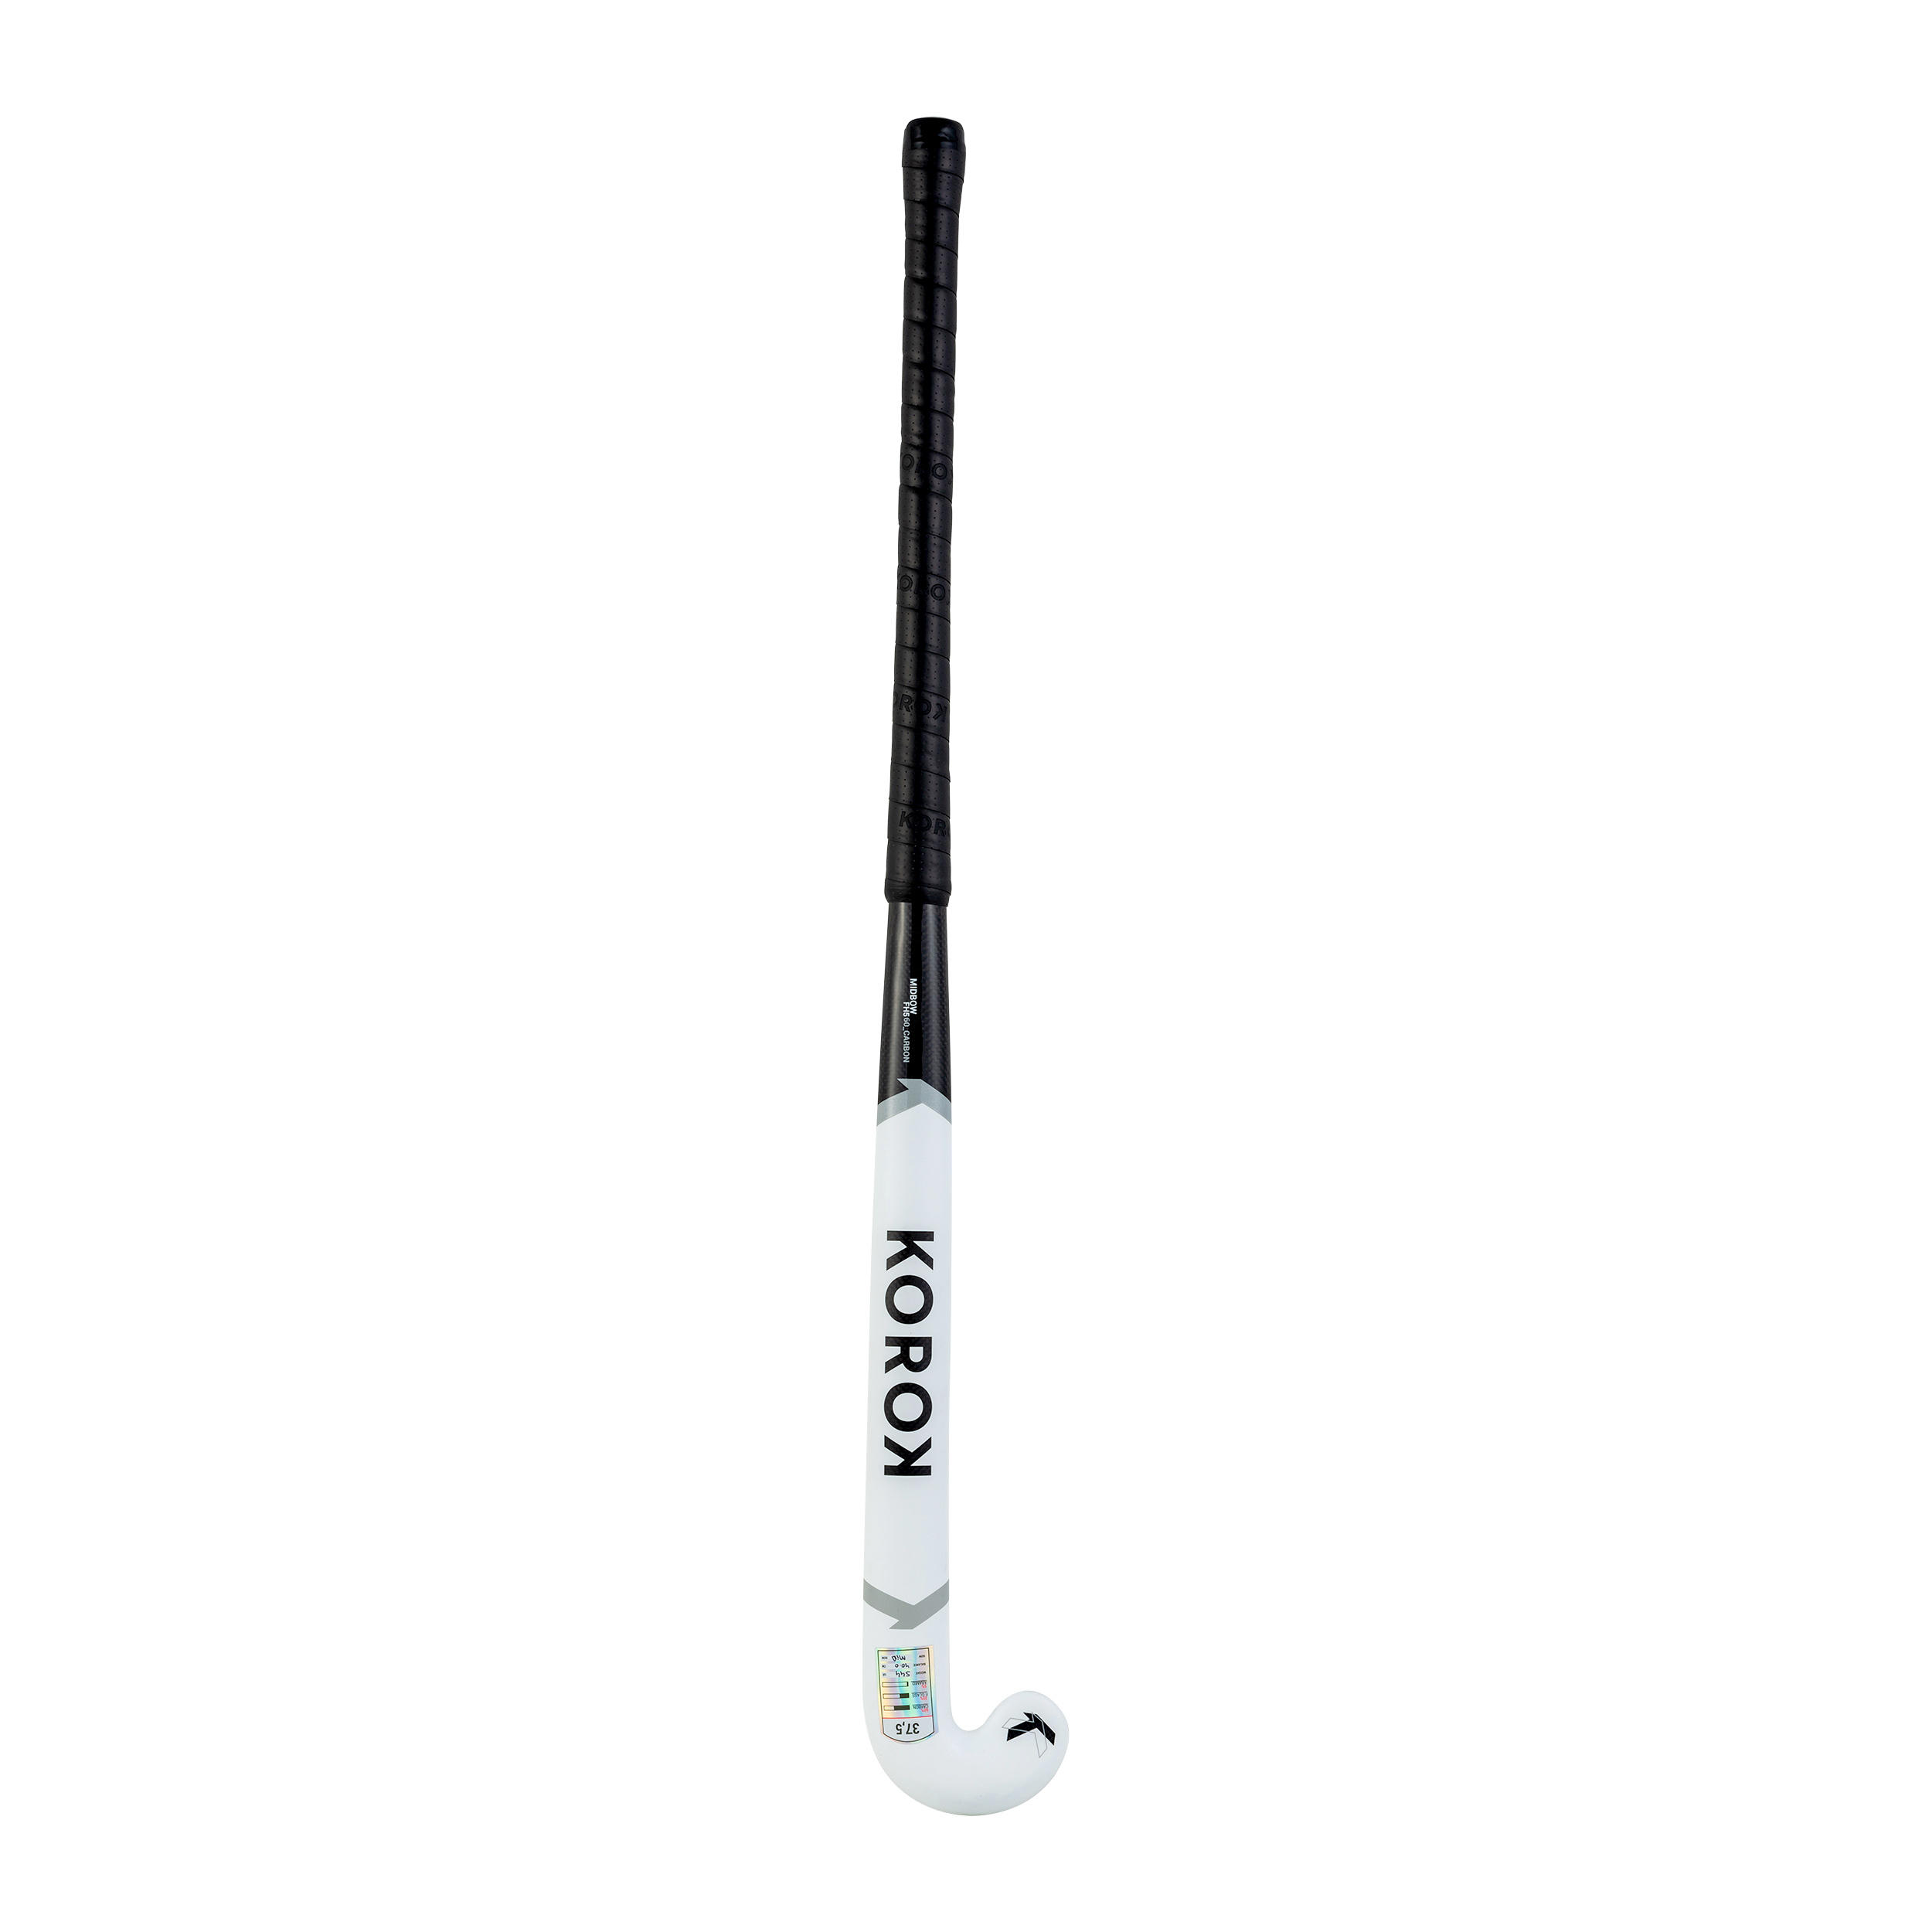 Adult Intermediate 60% Carbon Mid Bow Field Hockey Stick FH560 - White/Grey 7/12